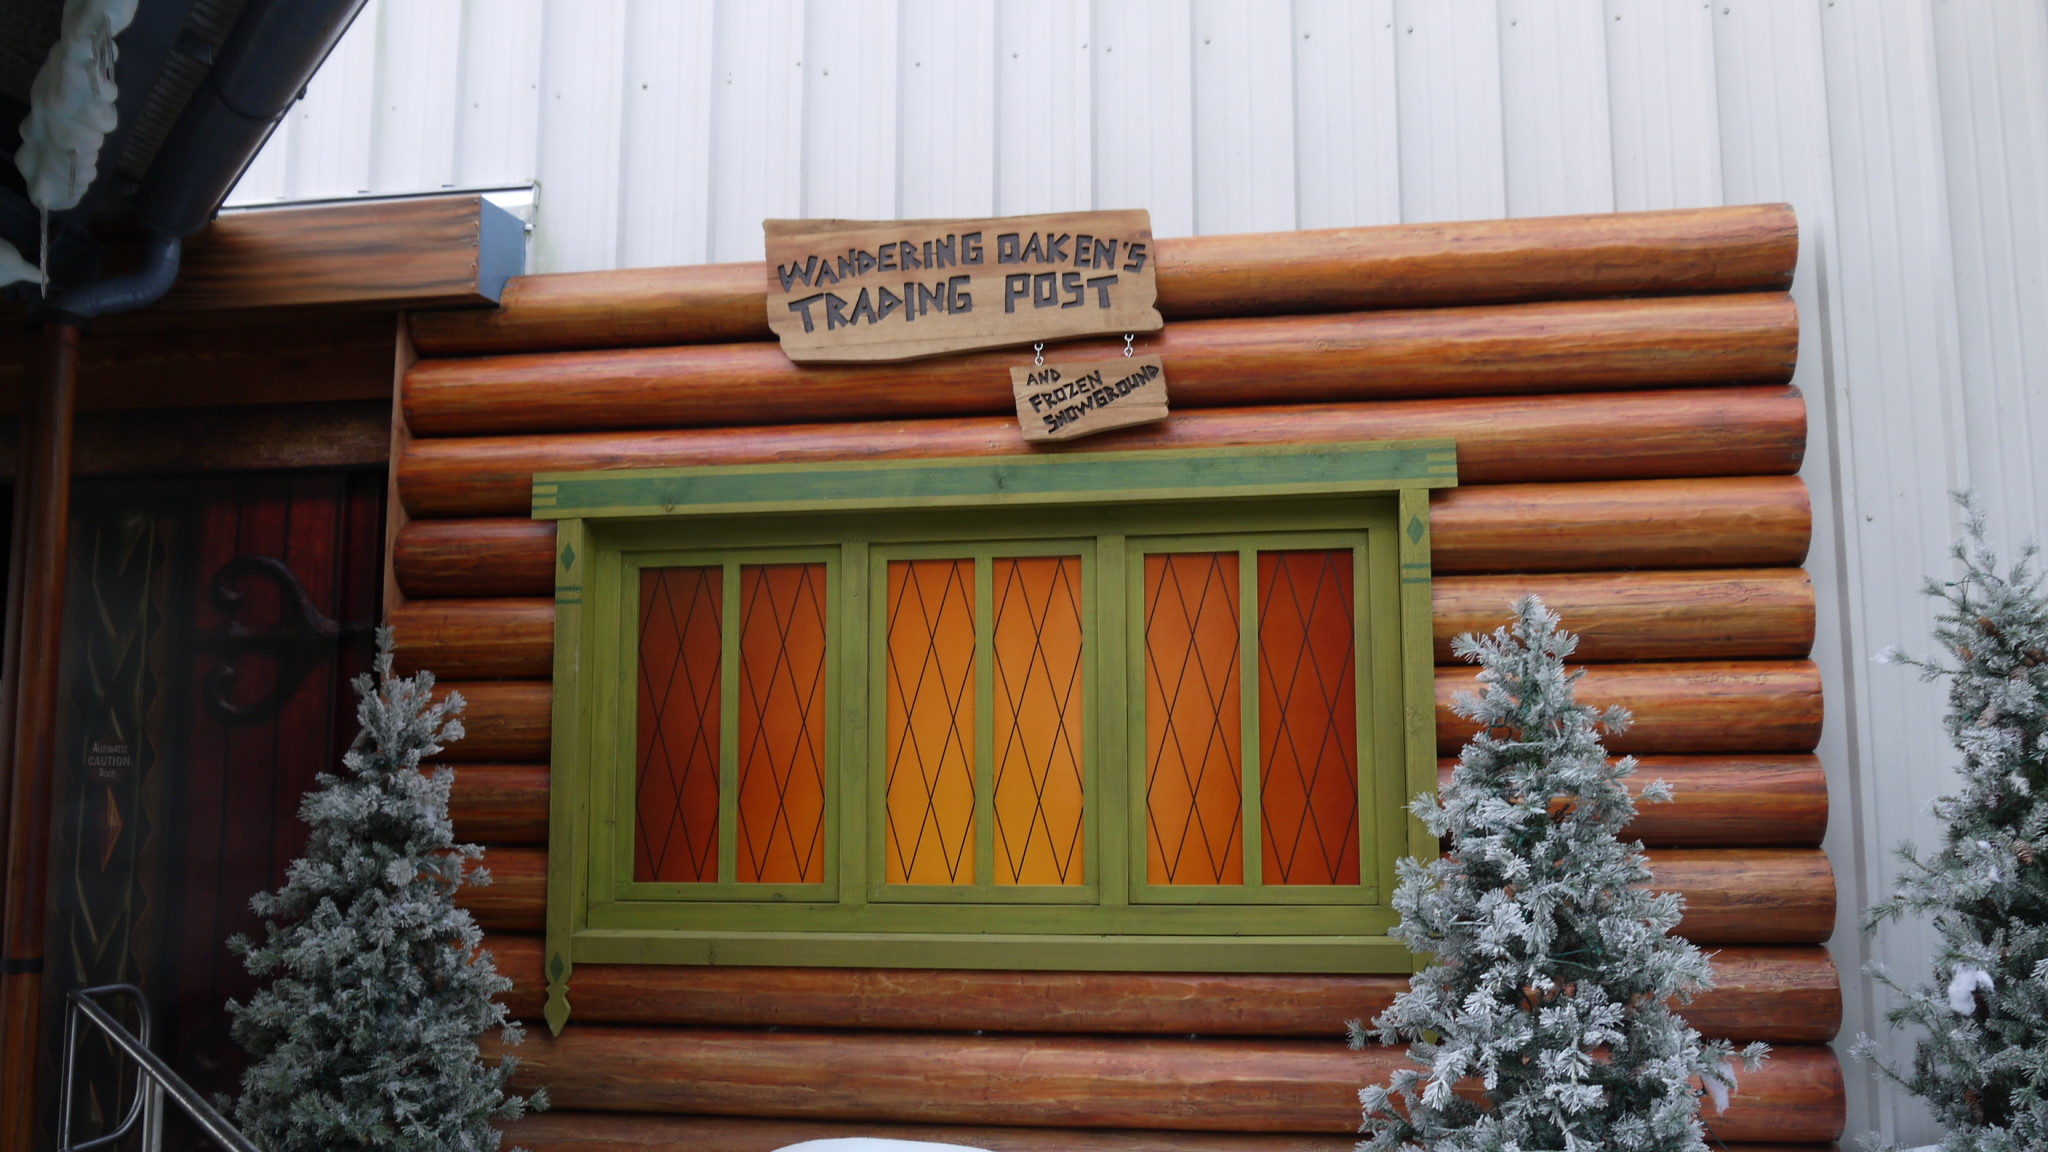 Wandering Oaken’s Trading Post is Now Closed